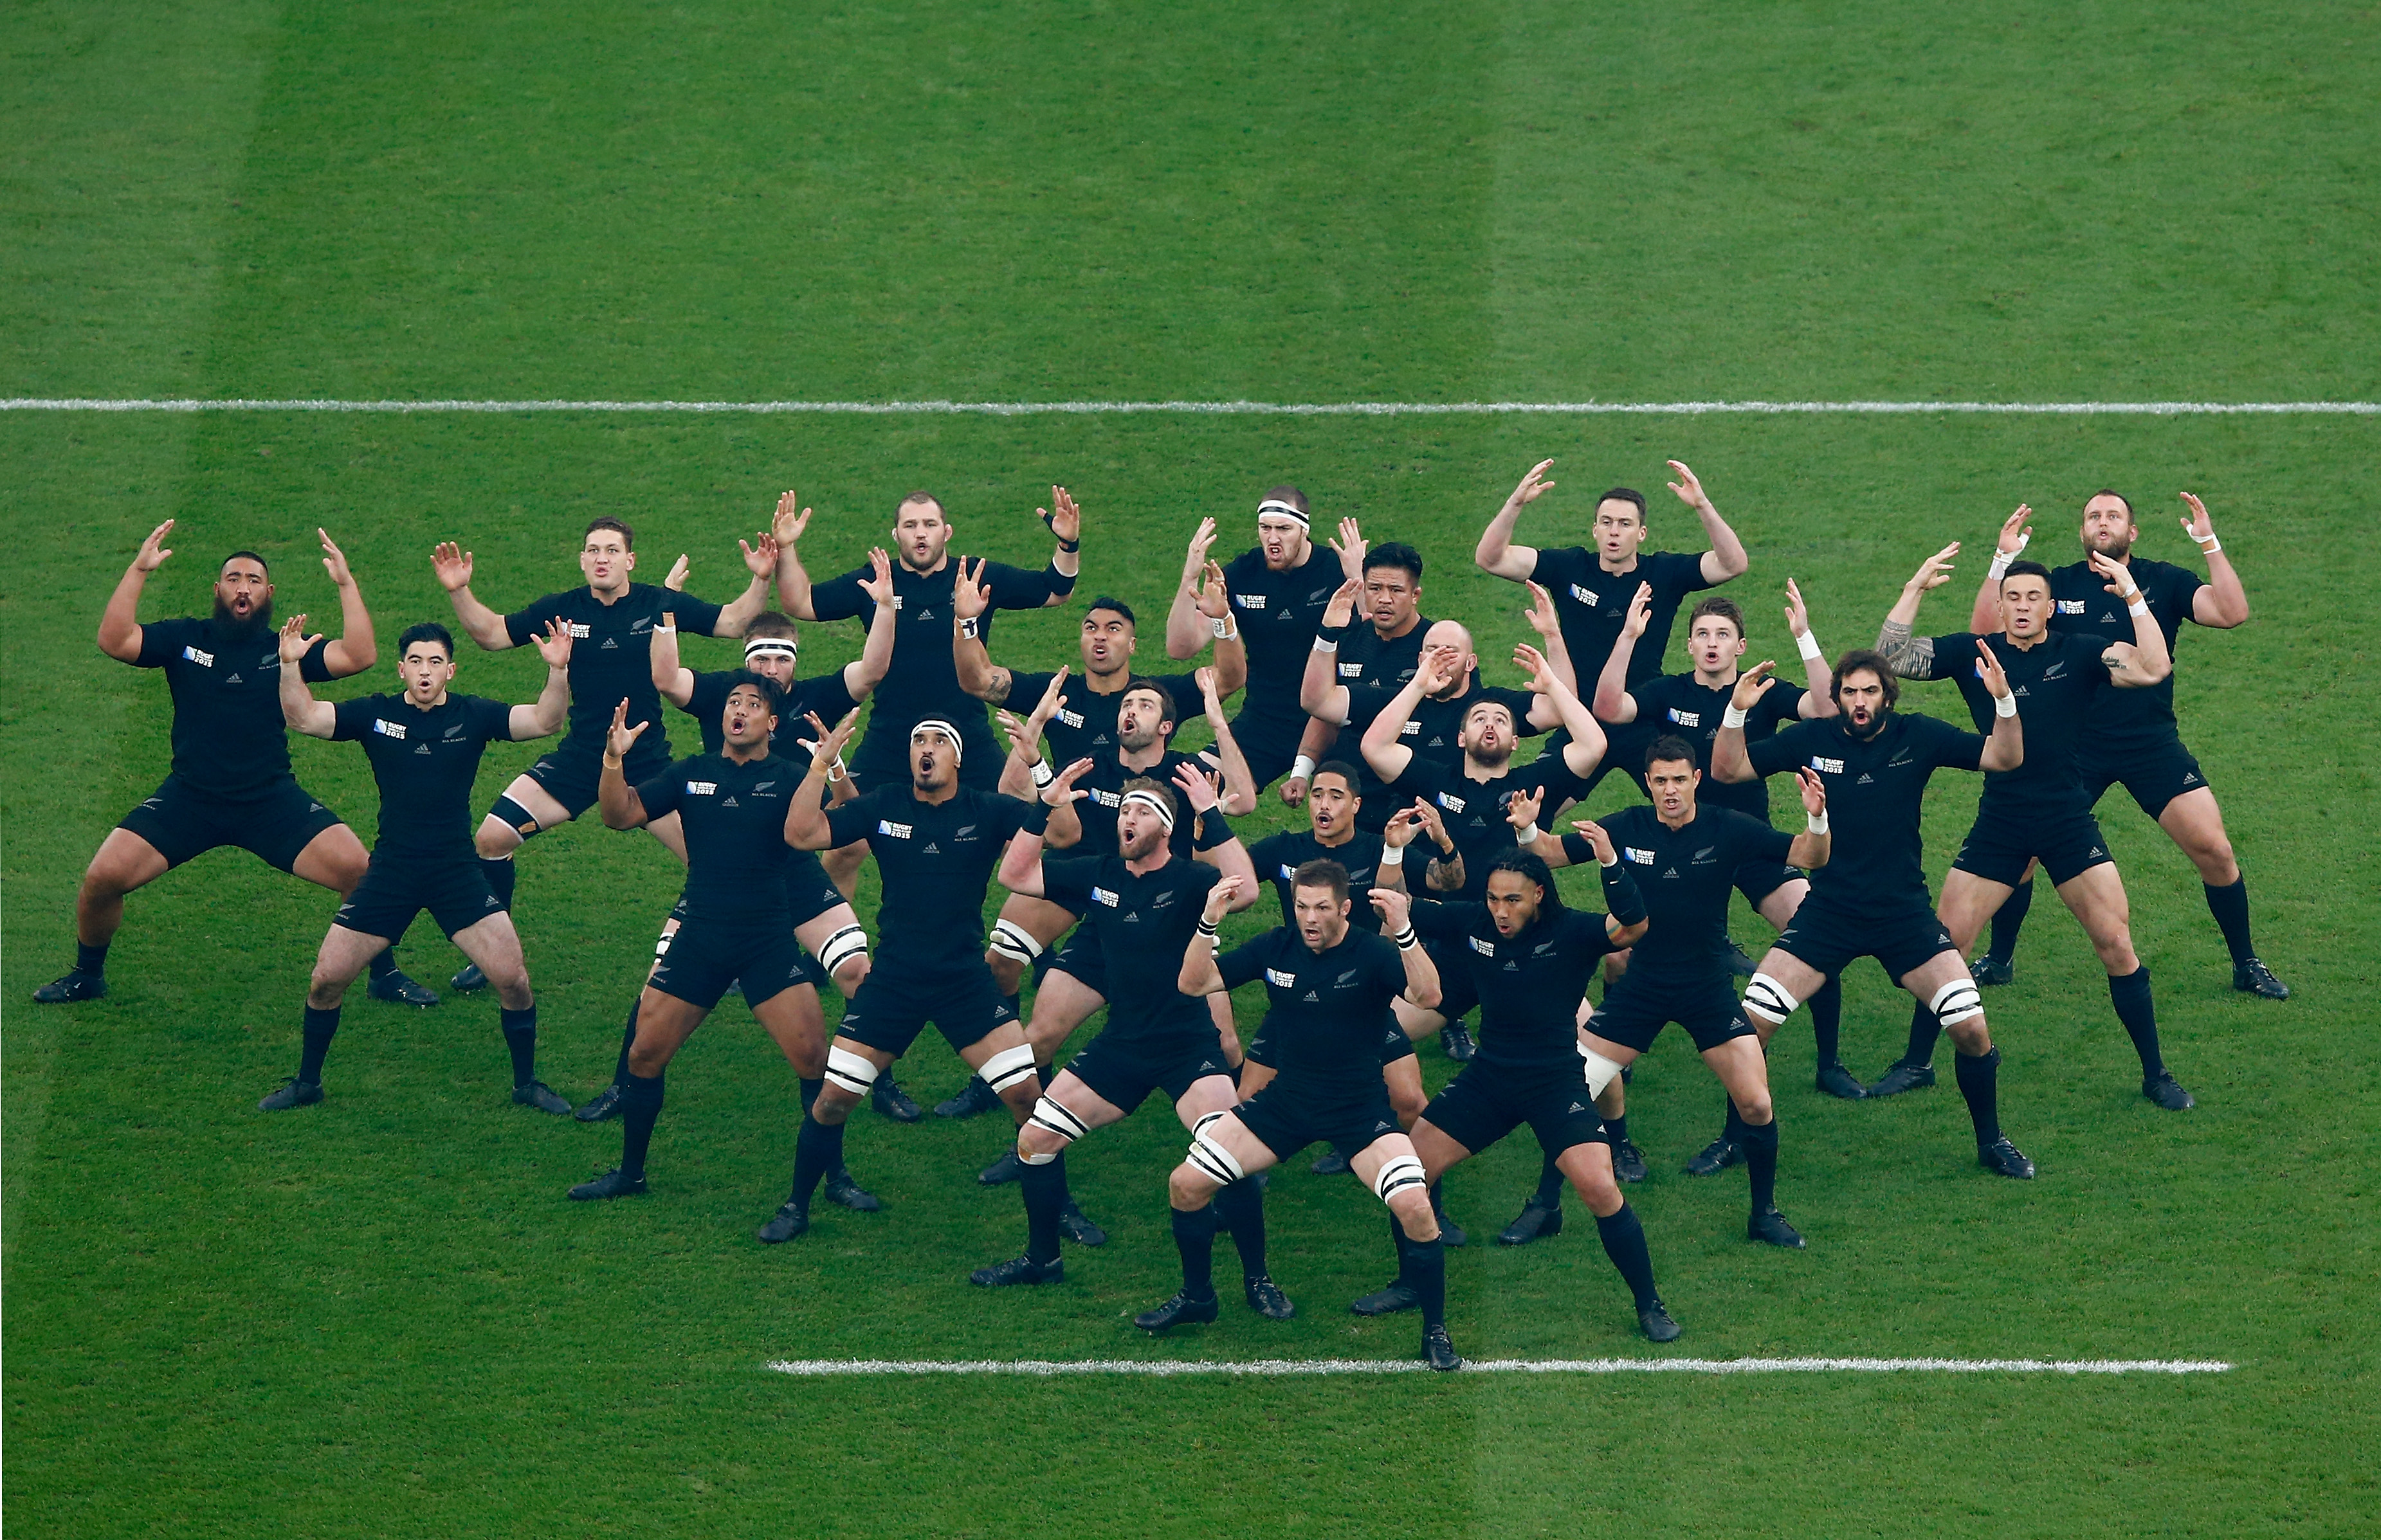 The Secrets Behind the World's Most Successful Team The All Blacks The Jersey